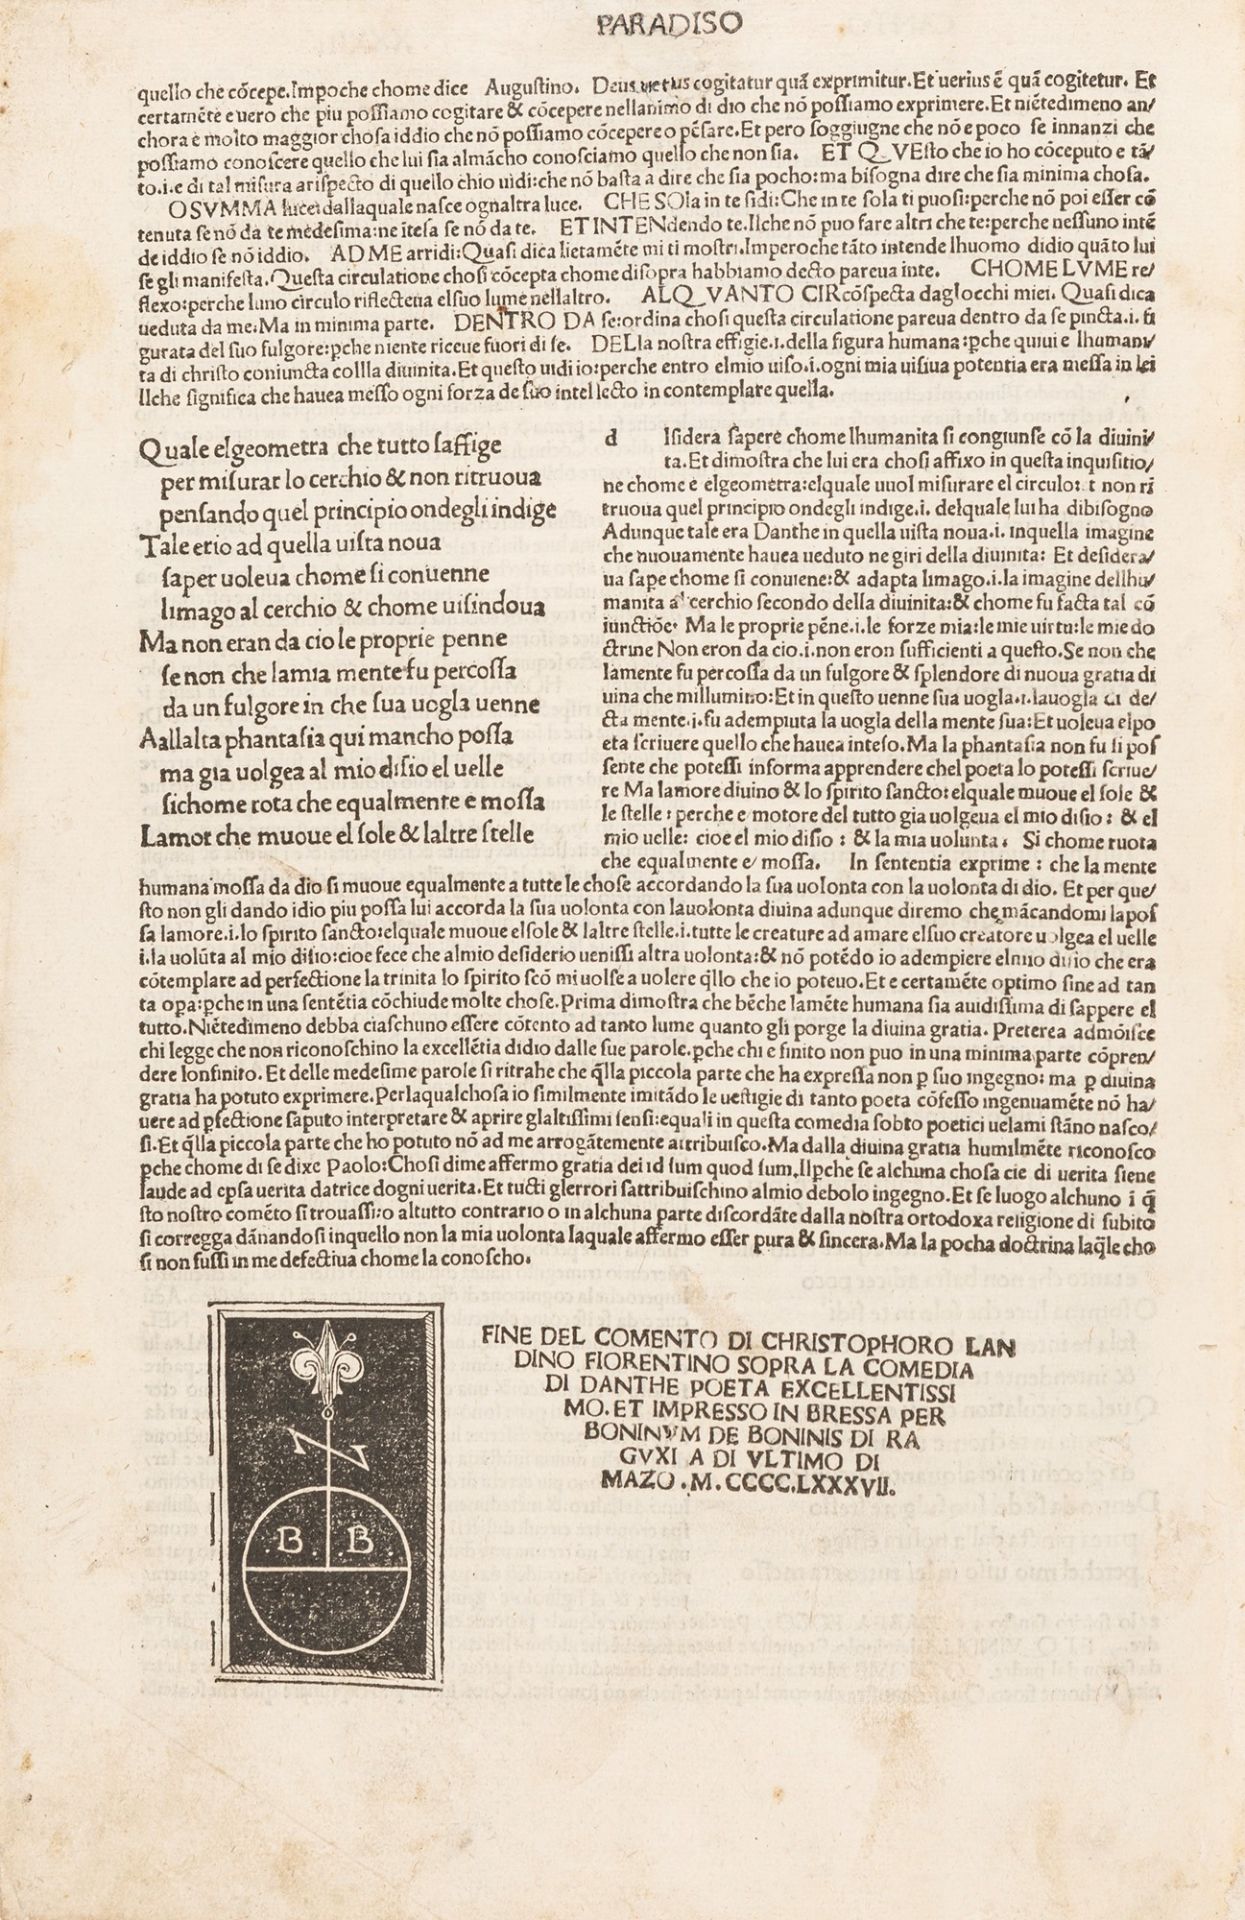 Incunabolo - Alighieri, Dante - The Comedy [Commentary by Christophorus Landinus]. - Image 7 of 7